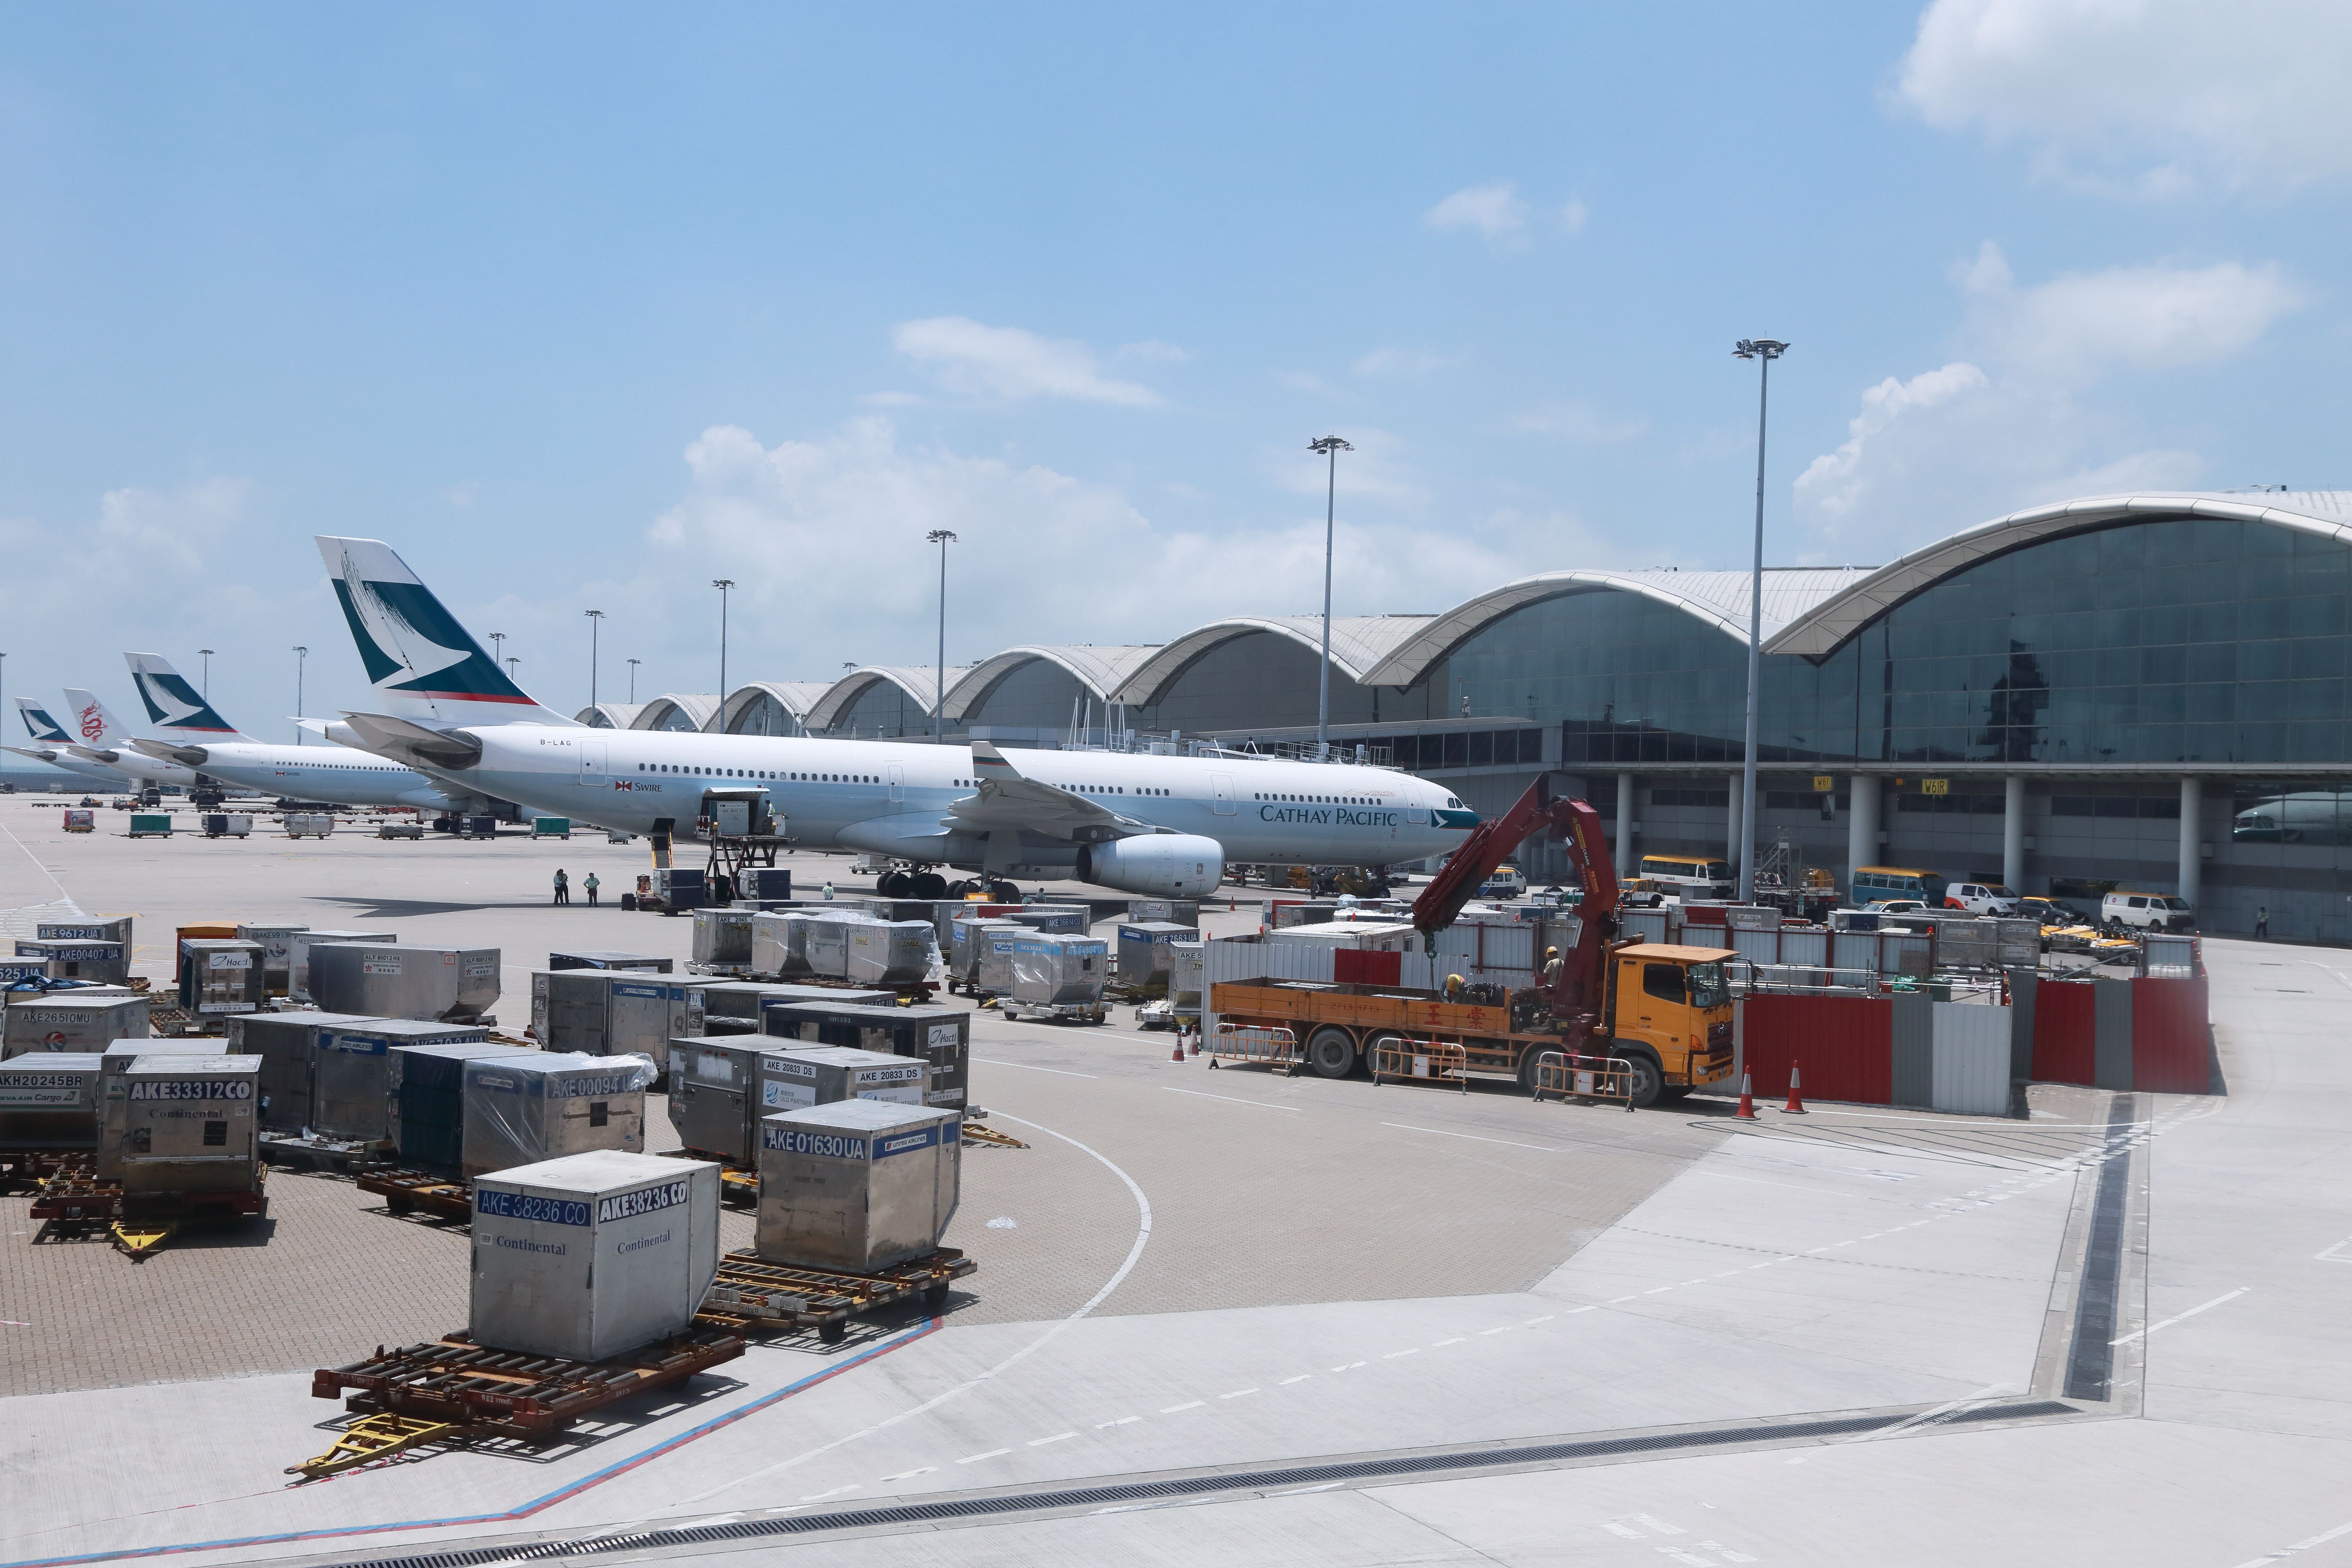 shutterstock_144285229 - JUNE 29 2013: Cathay Pacific plane ready for boarding in Hong Kong Airport on 29 June 2013. 